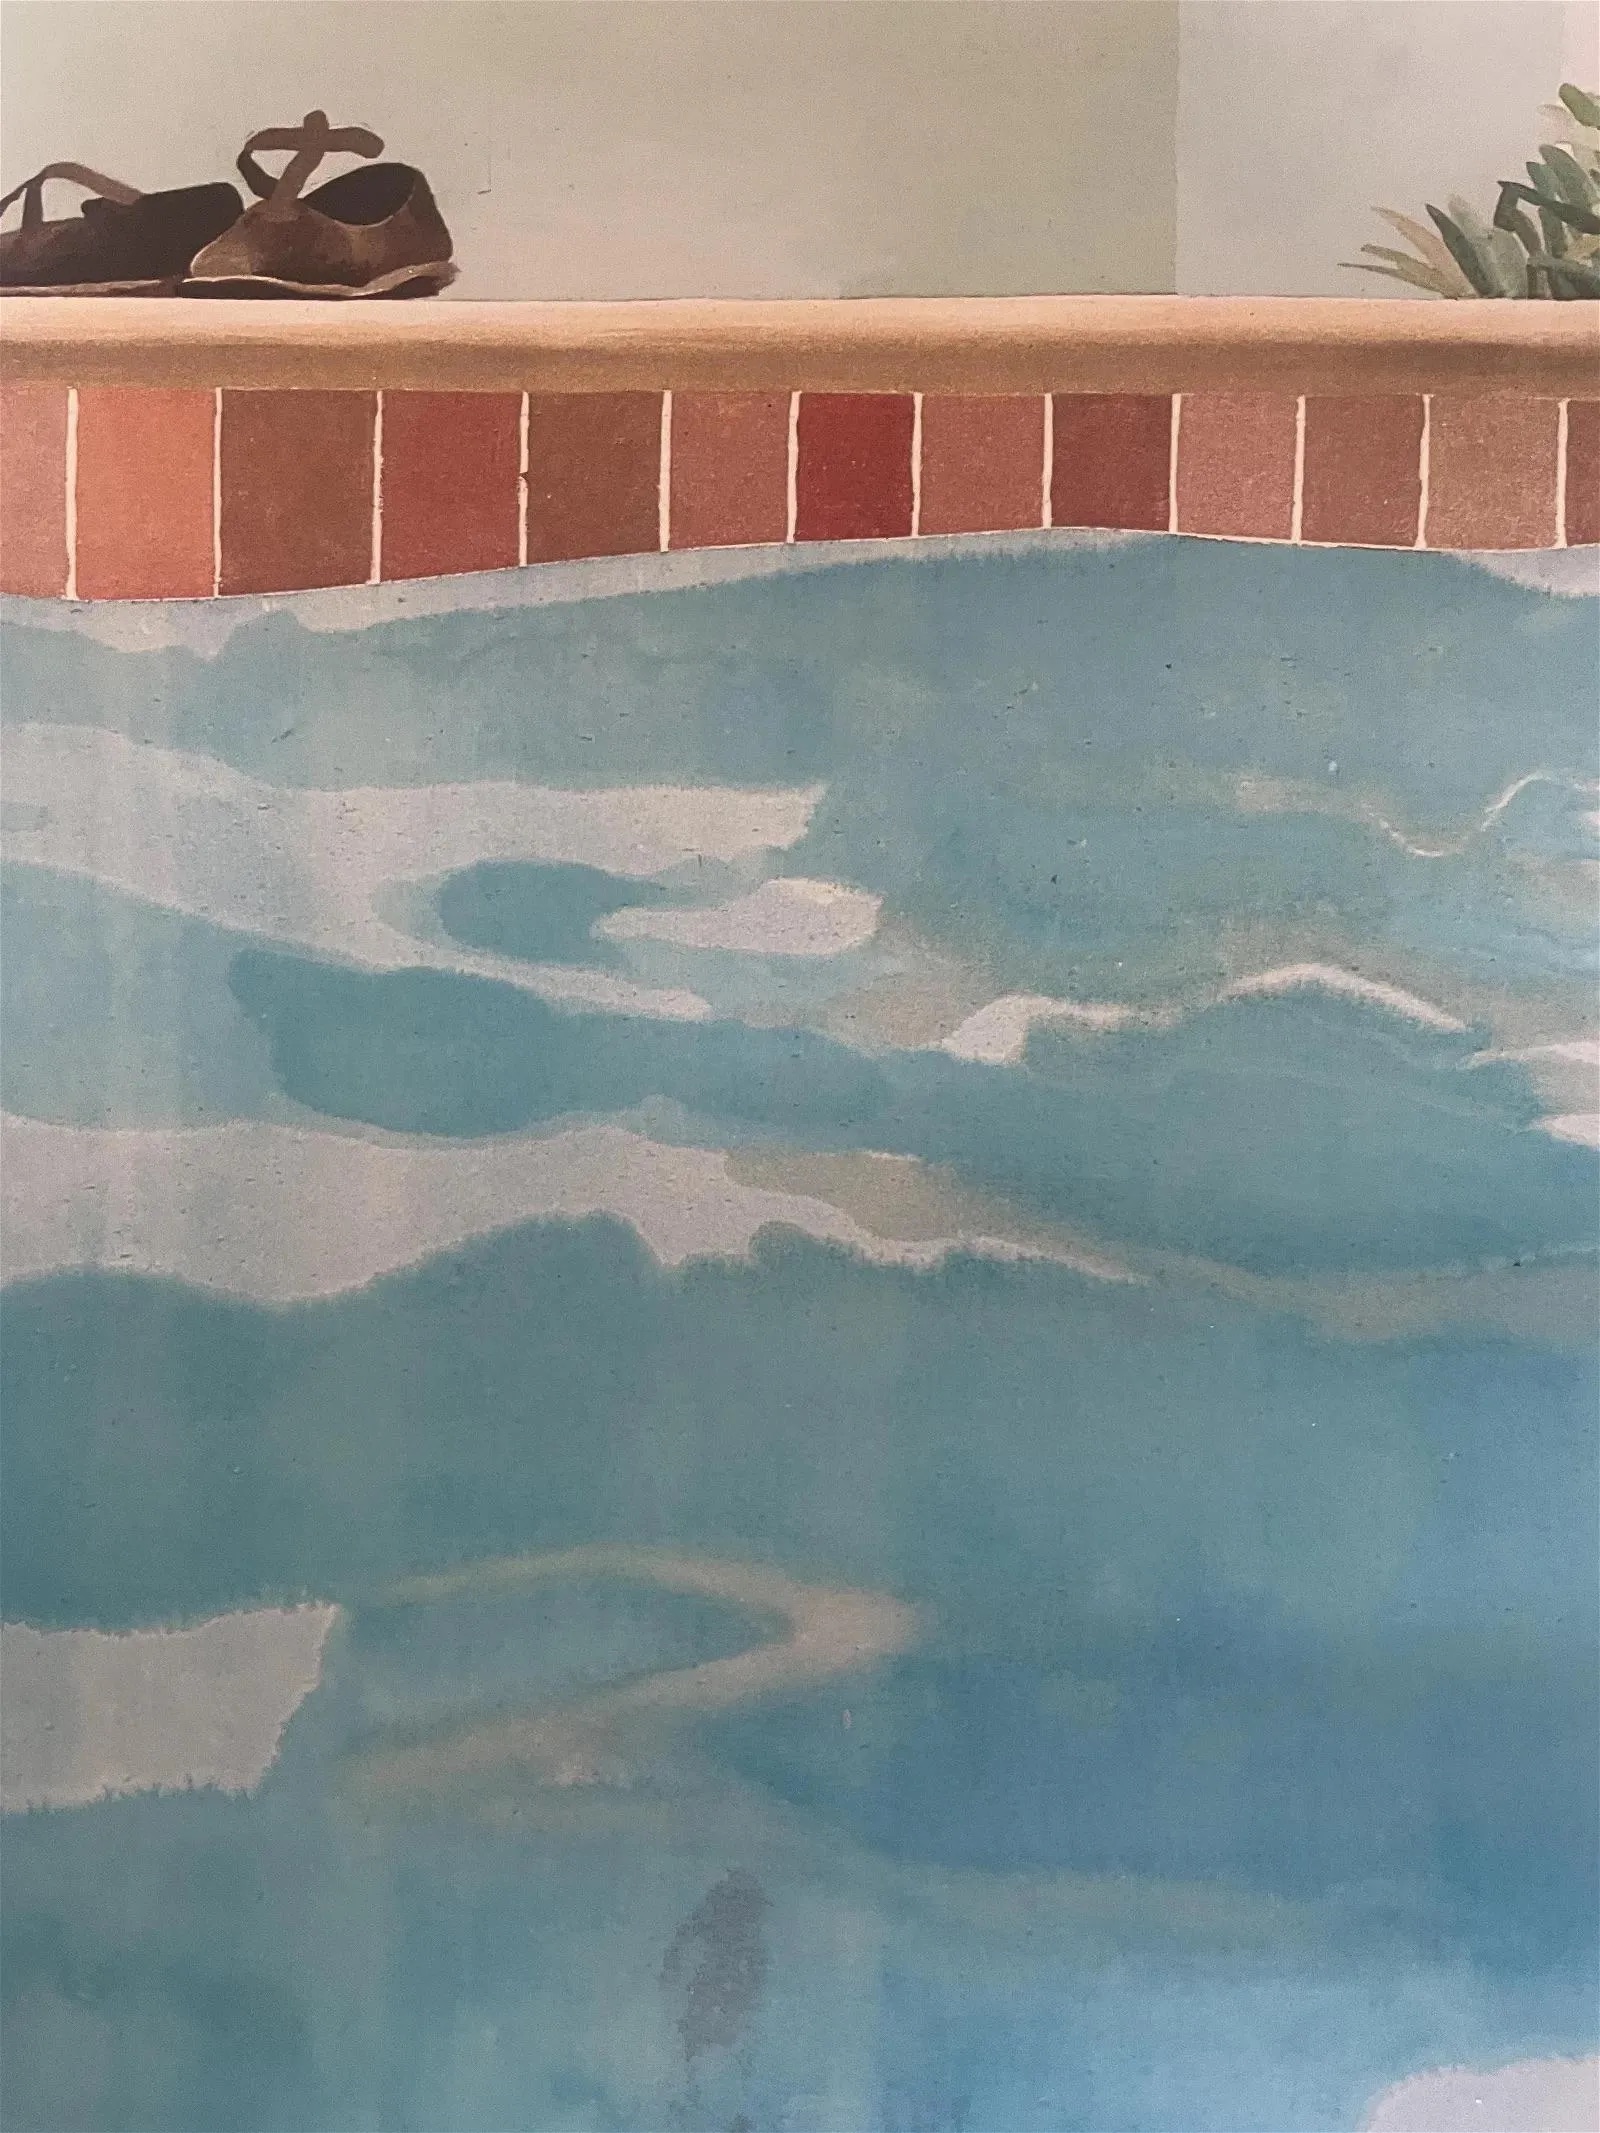 David Hockney "Pool and Steps, 1971" Offset Lithograph - Image 5 of 6